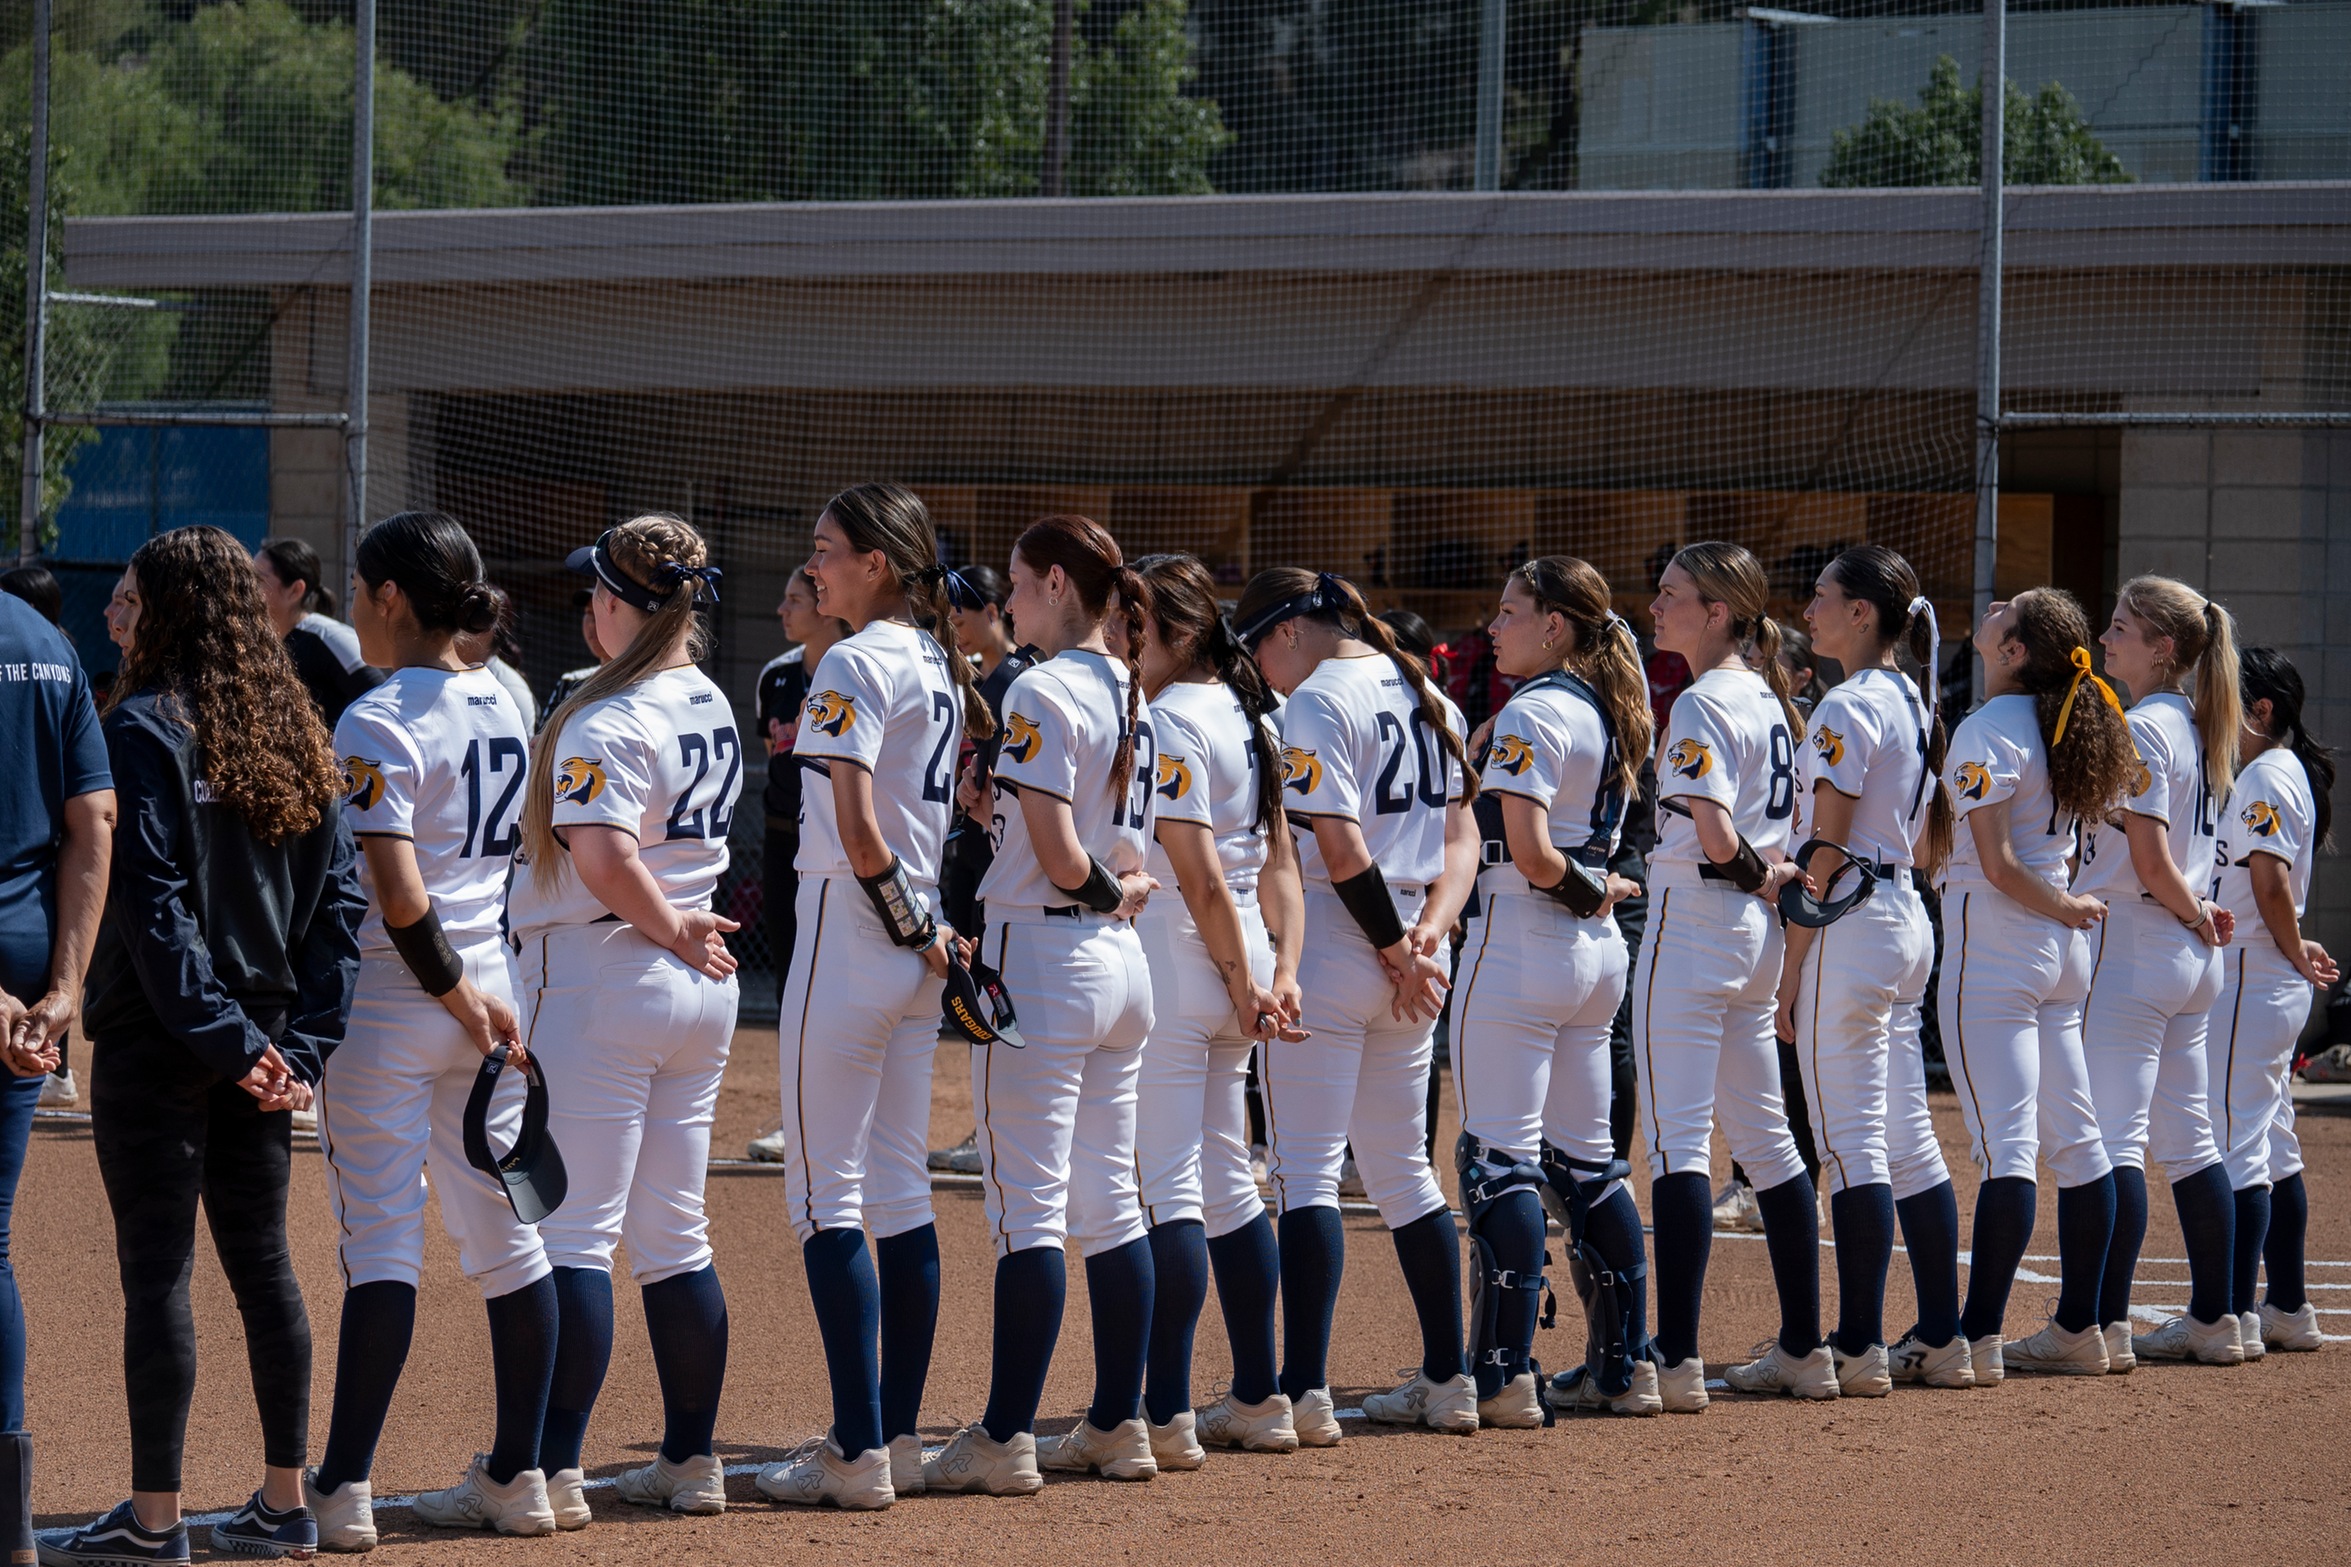 Stock image of COC softball team lined up on field prior to National Anthem.